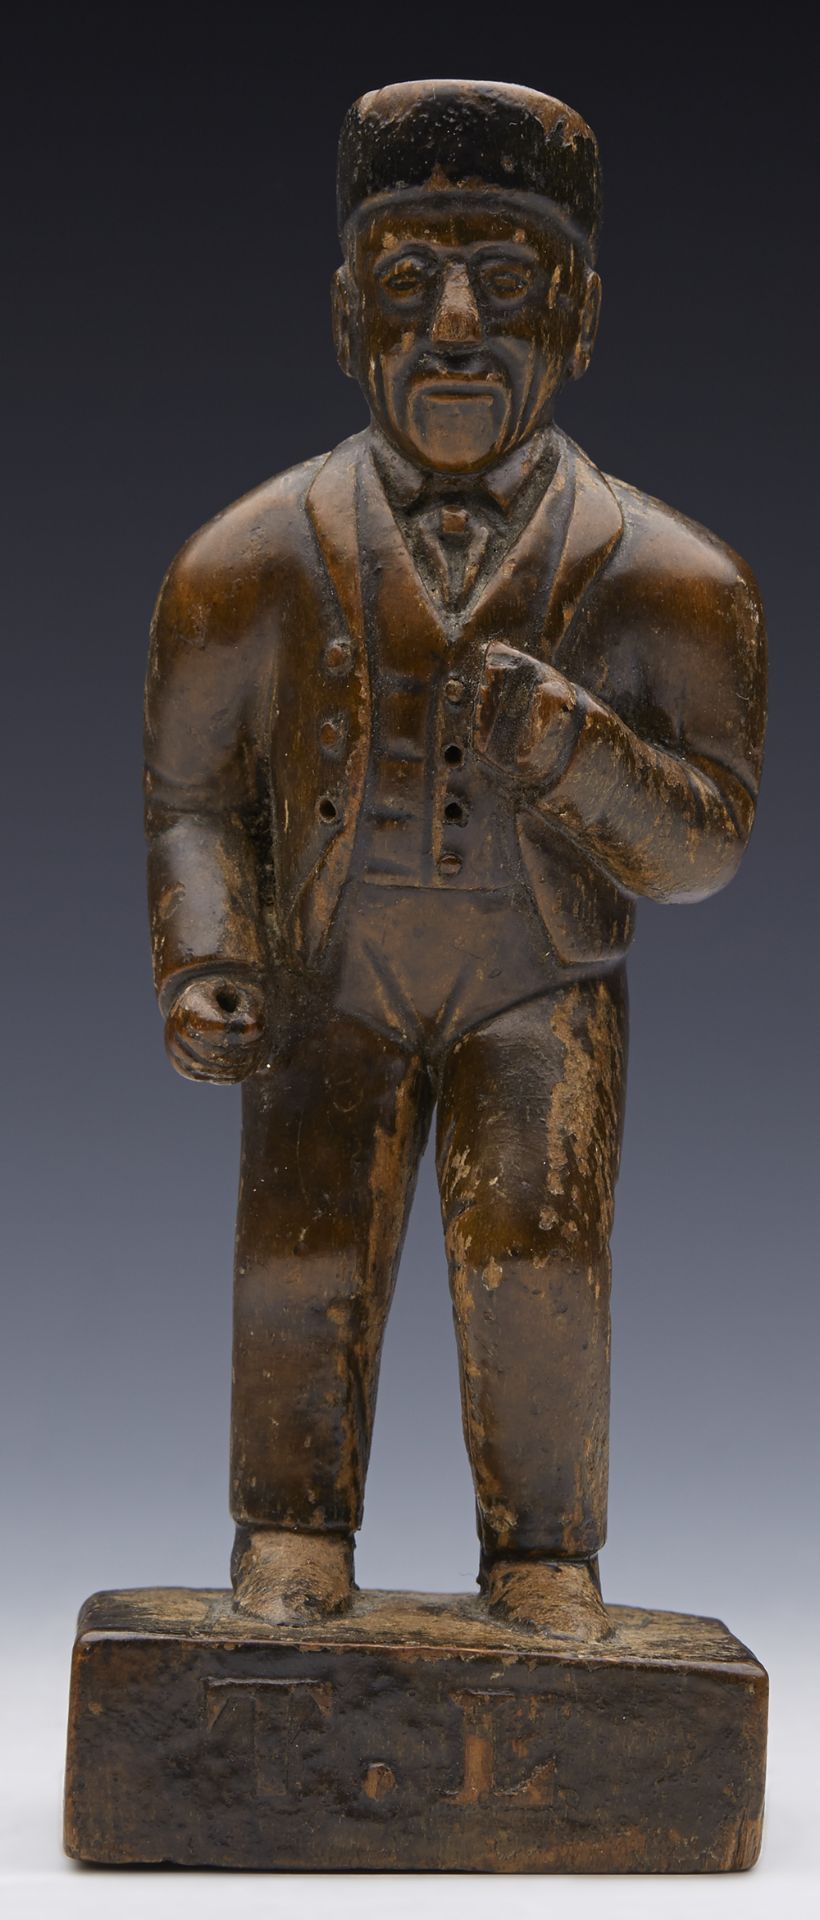 Antique Carved Blackforest Suited Figure Of A Local Man 19Th C.